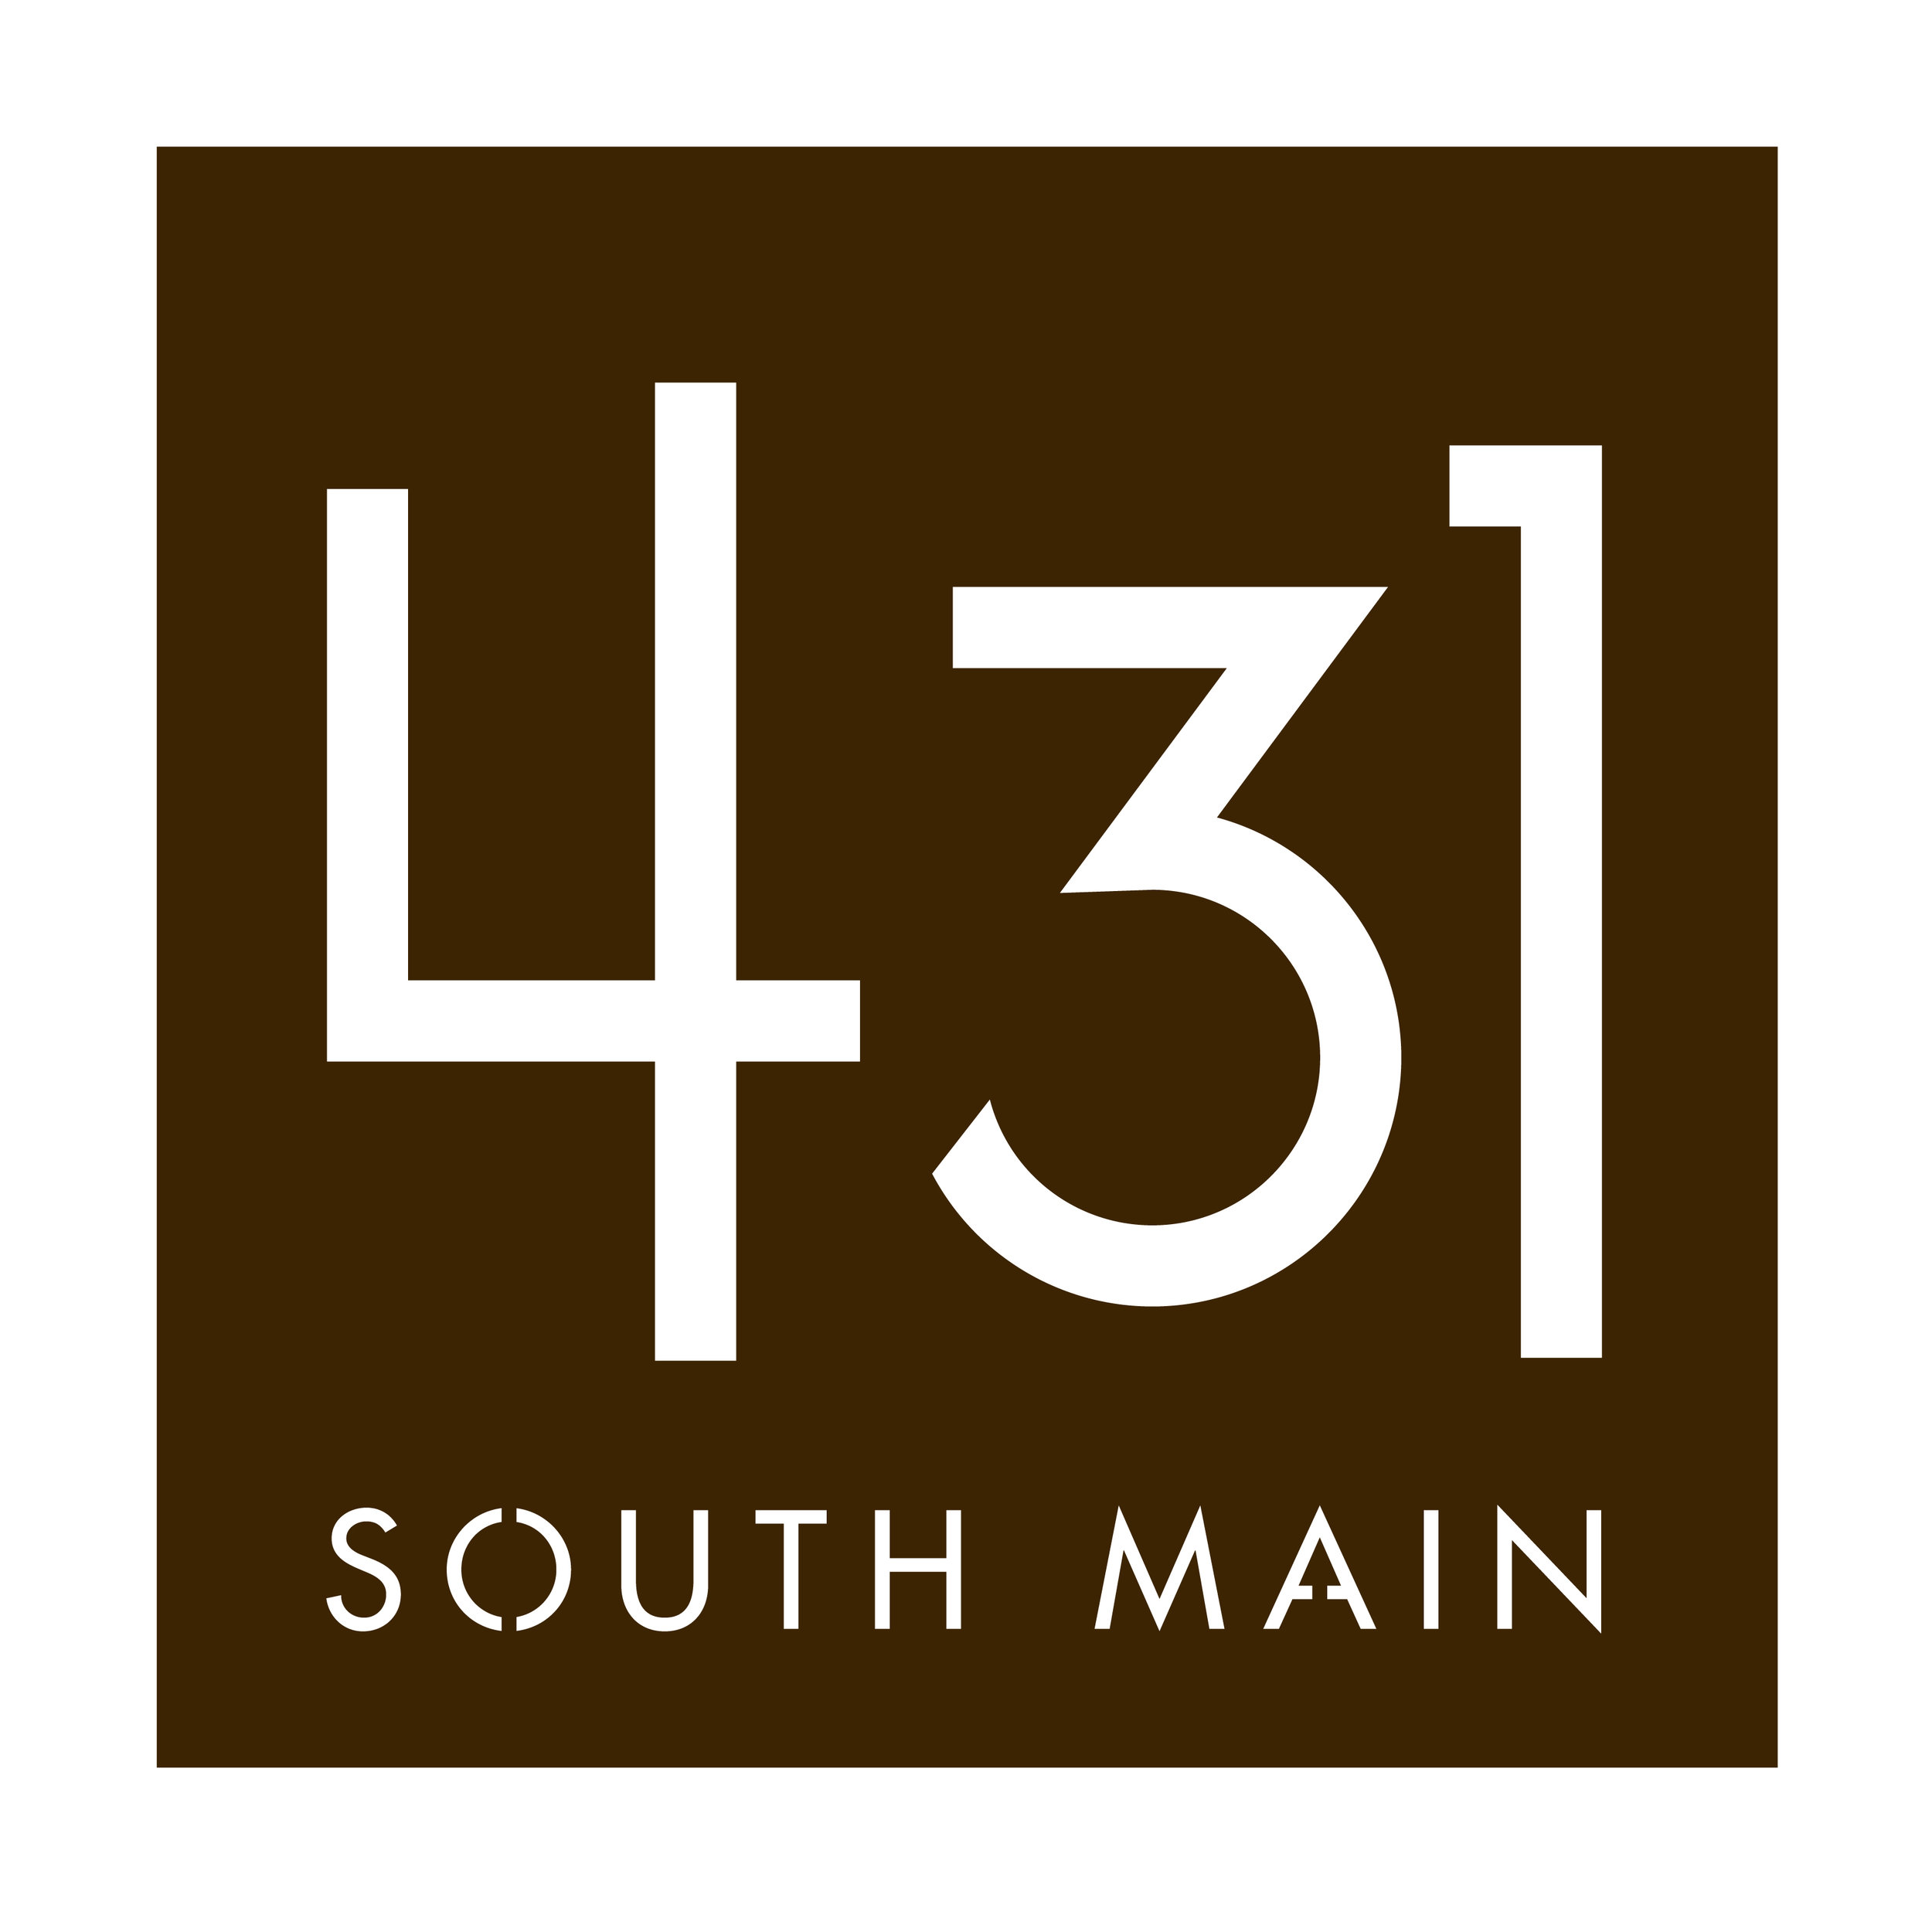  431 South Main building logo  Branding creative and design by Chuck Mitchell 